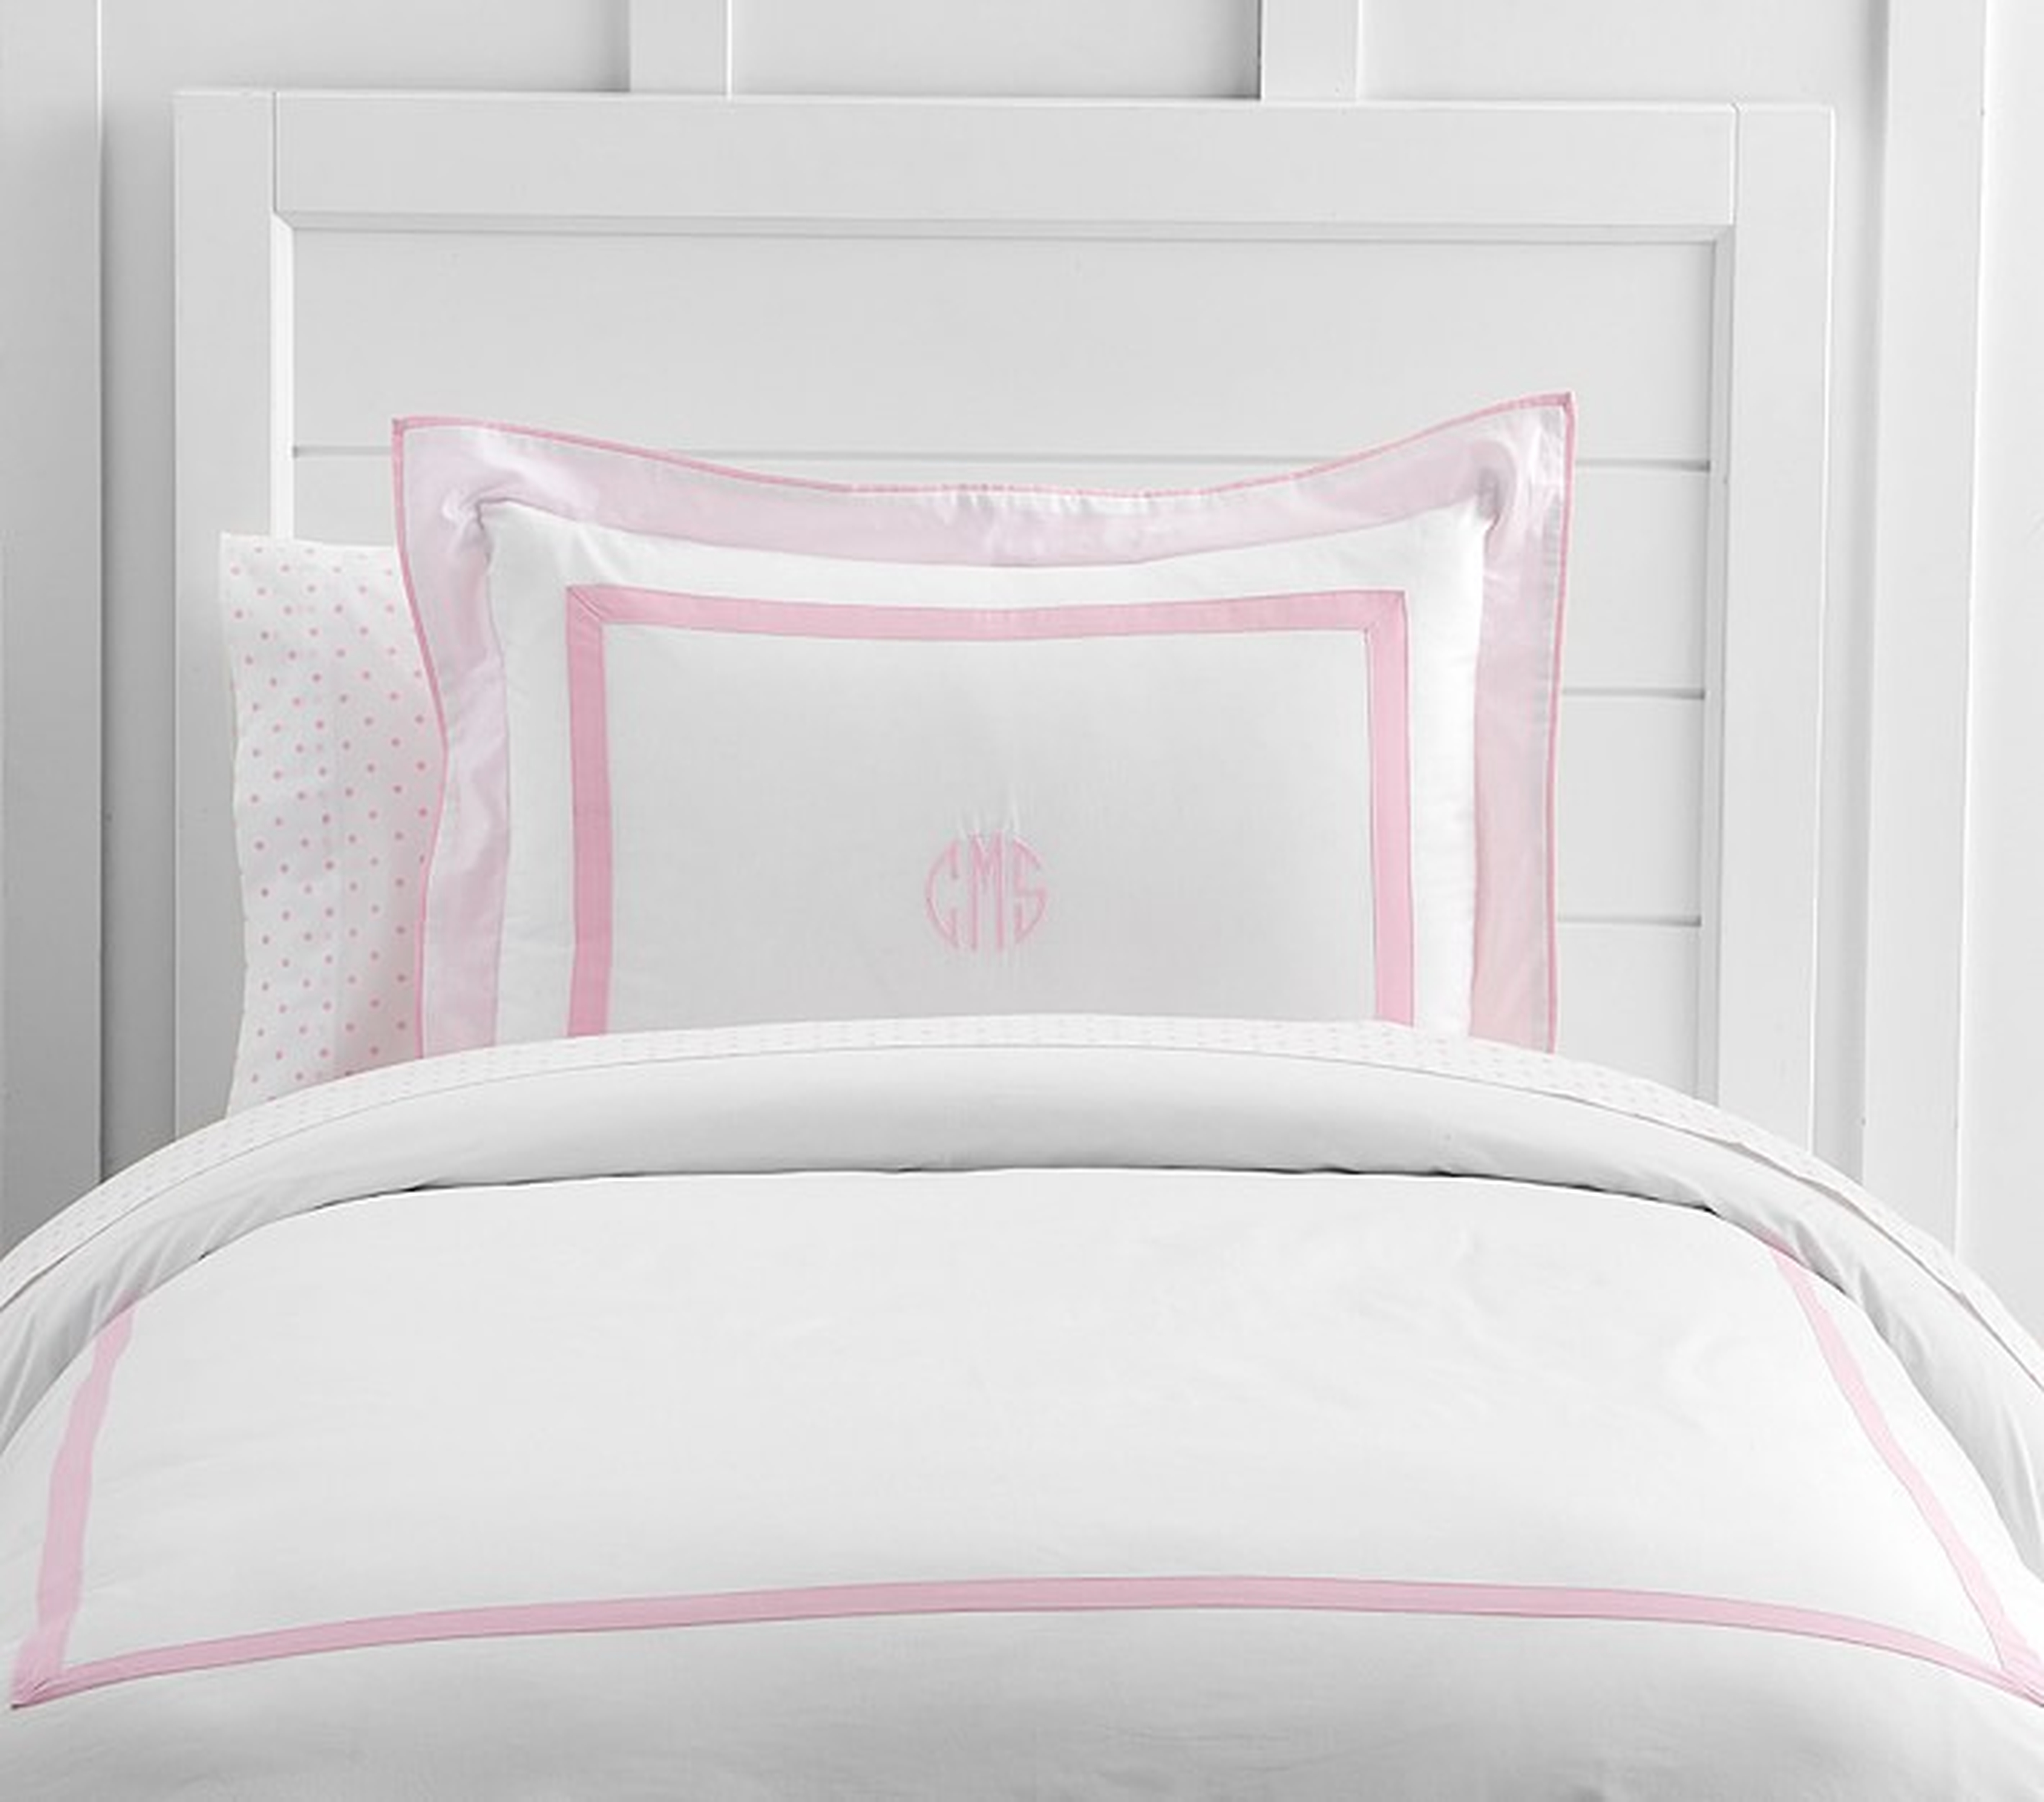 Decorator Solid Border Duvet Cover, Twin, Light Pink - Pottery Barn Kids